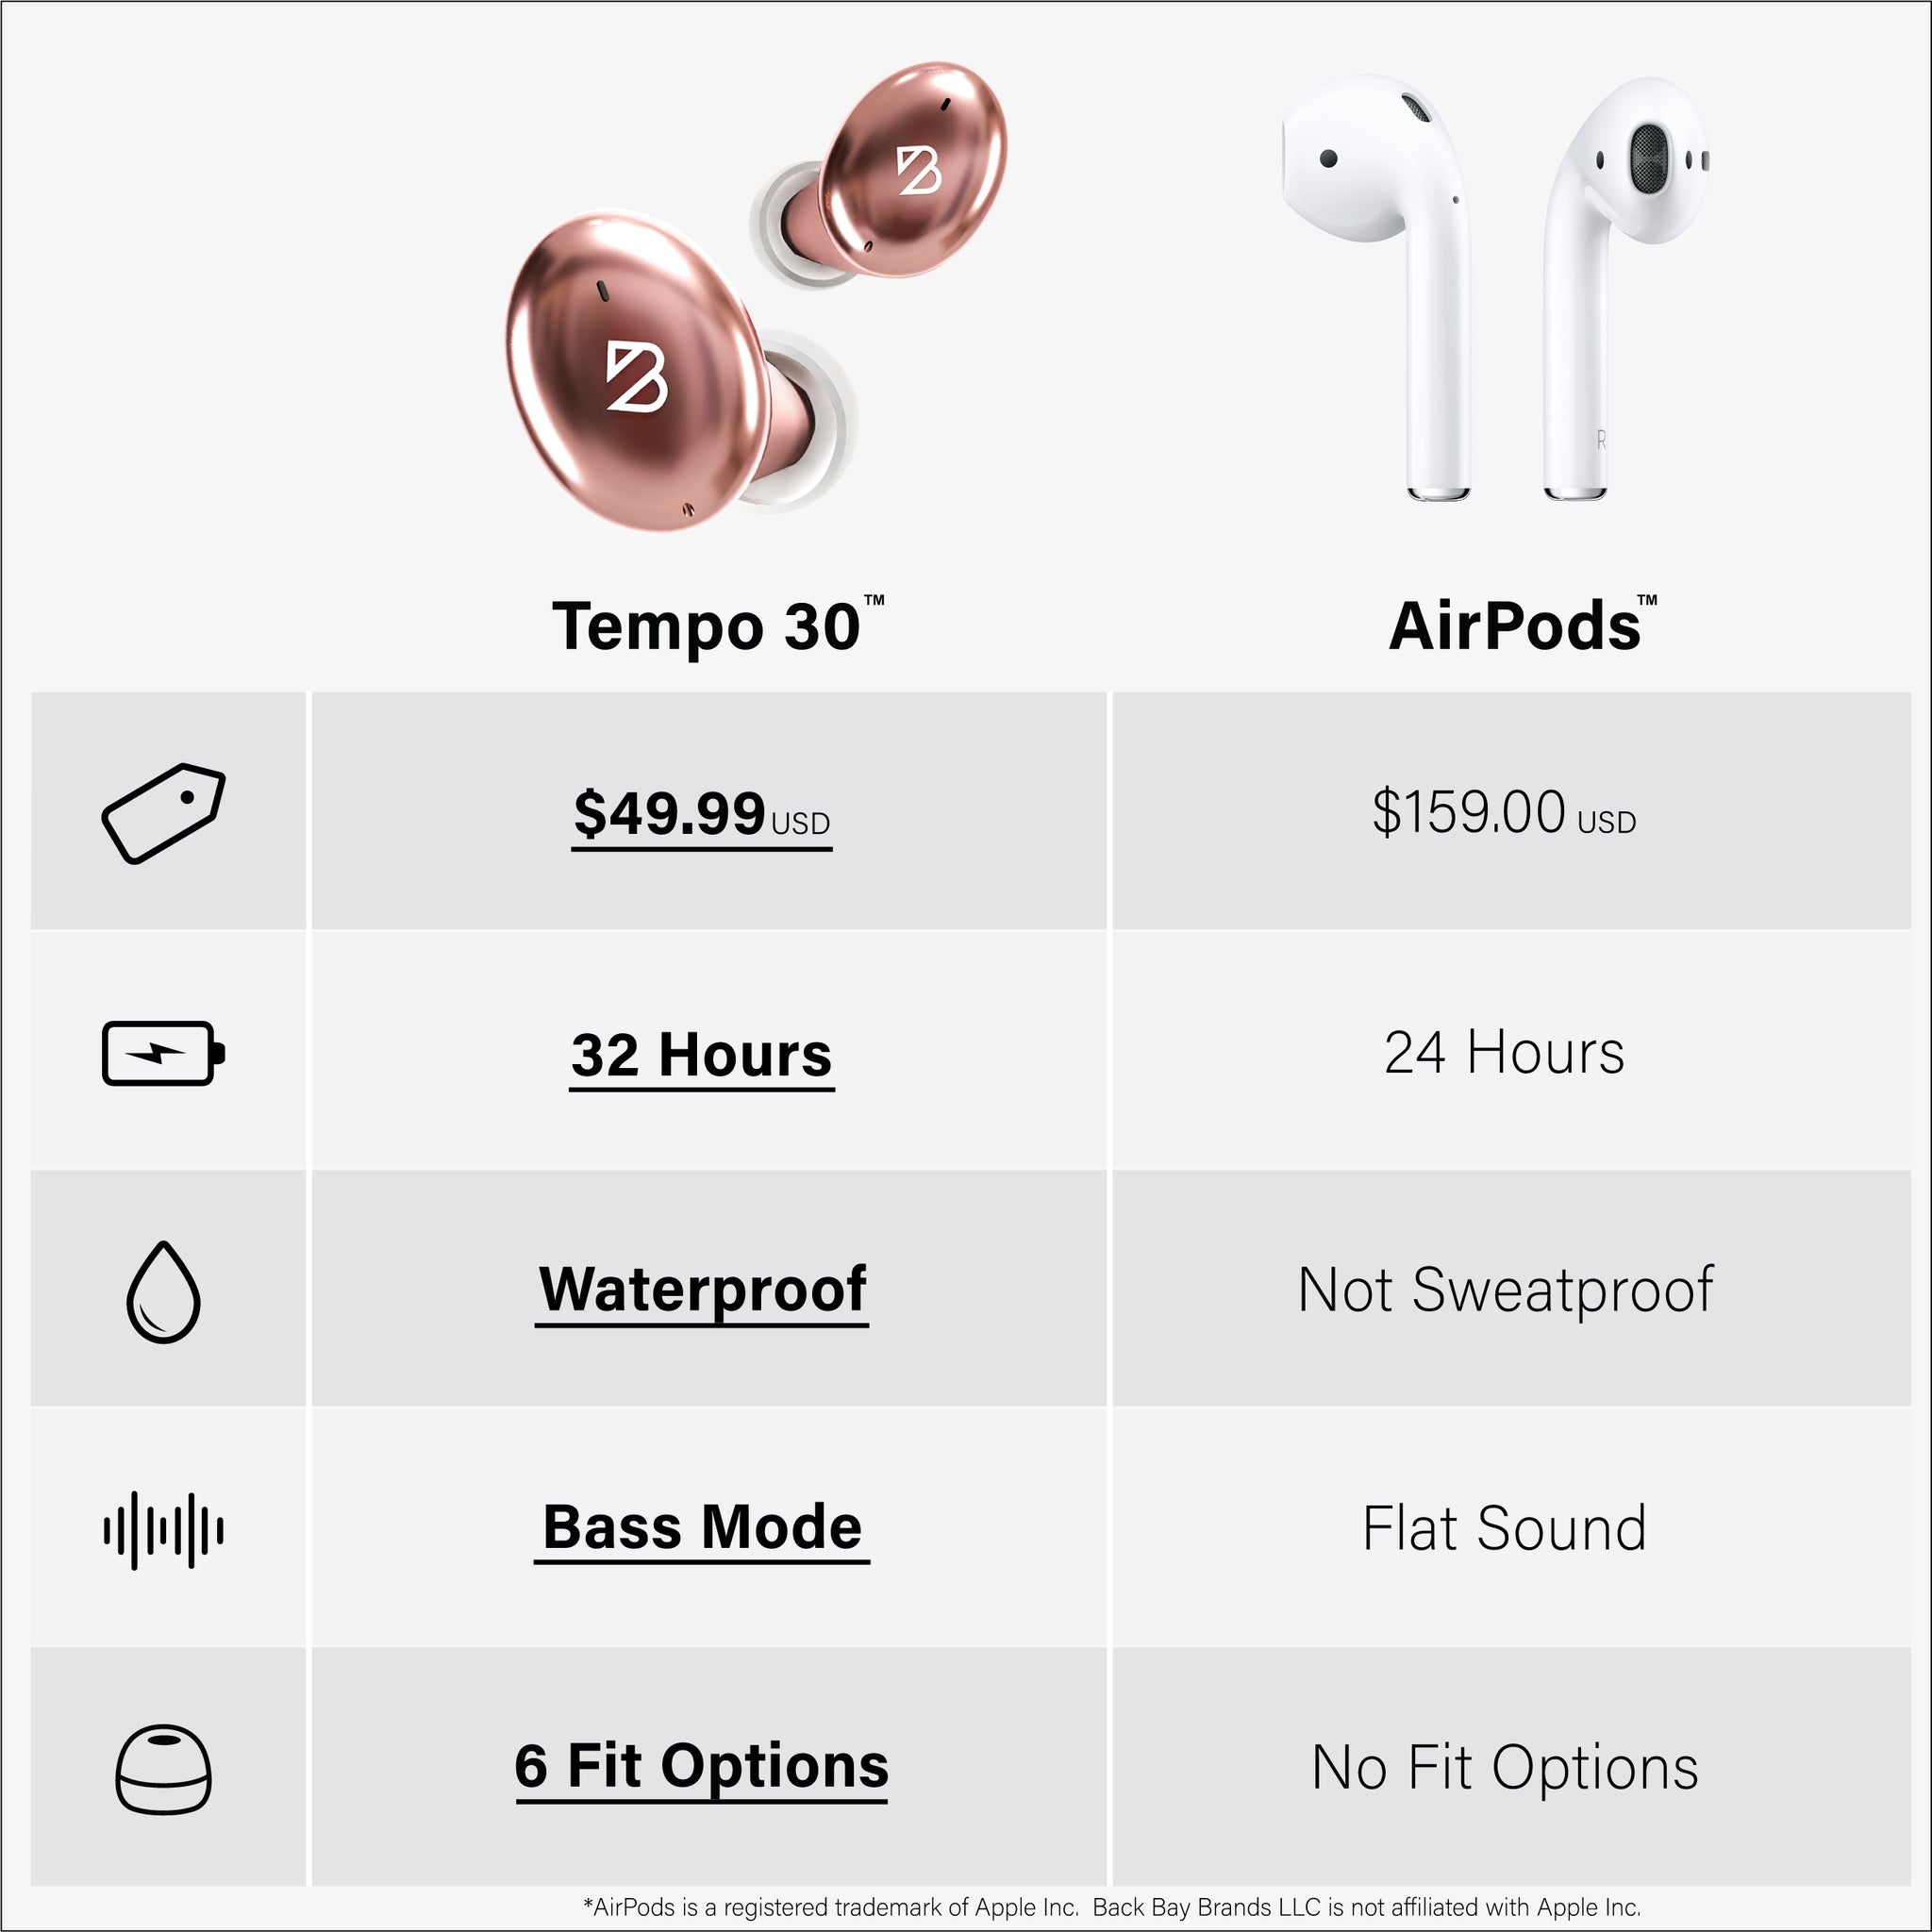 Tempo 30 Wireless Earbuds- Deep Bass with 32 Total Hours of Battery Life